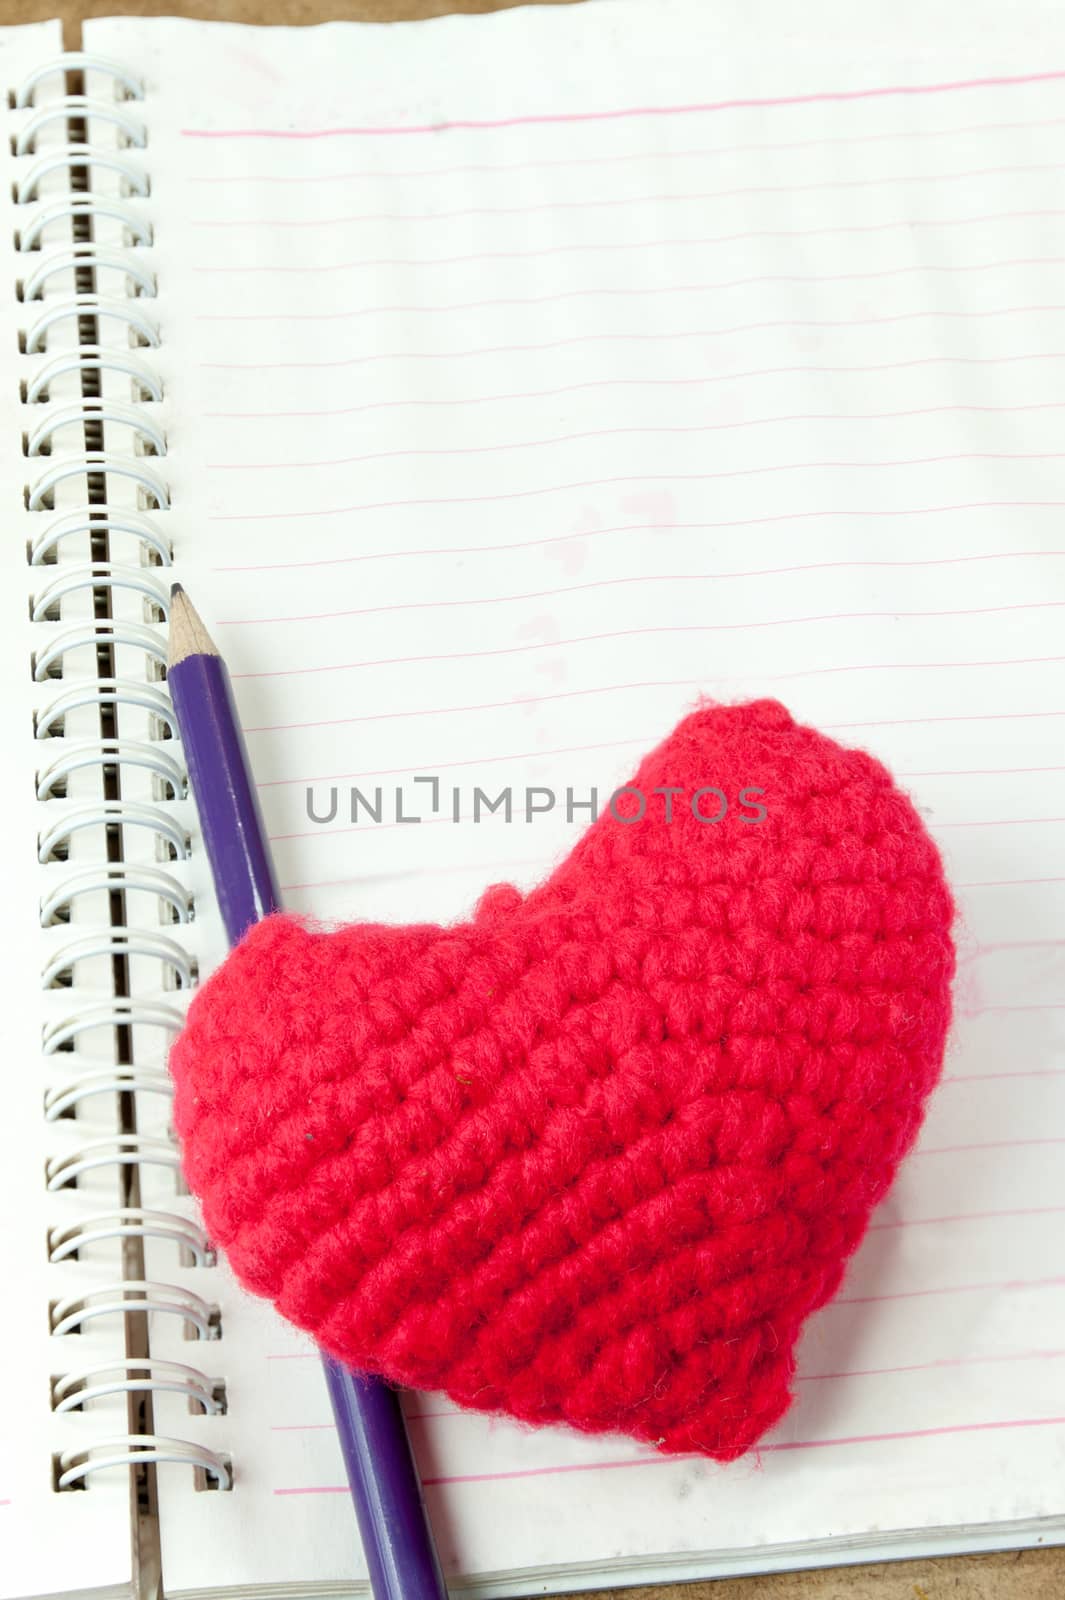 Crochet heart red color and pencil on note book